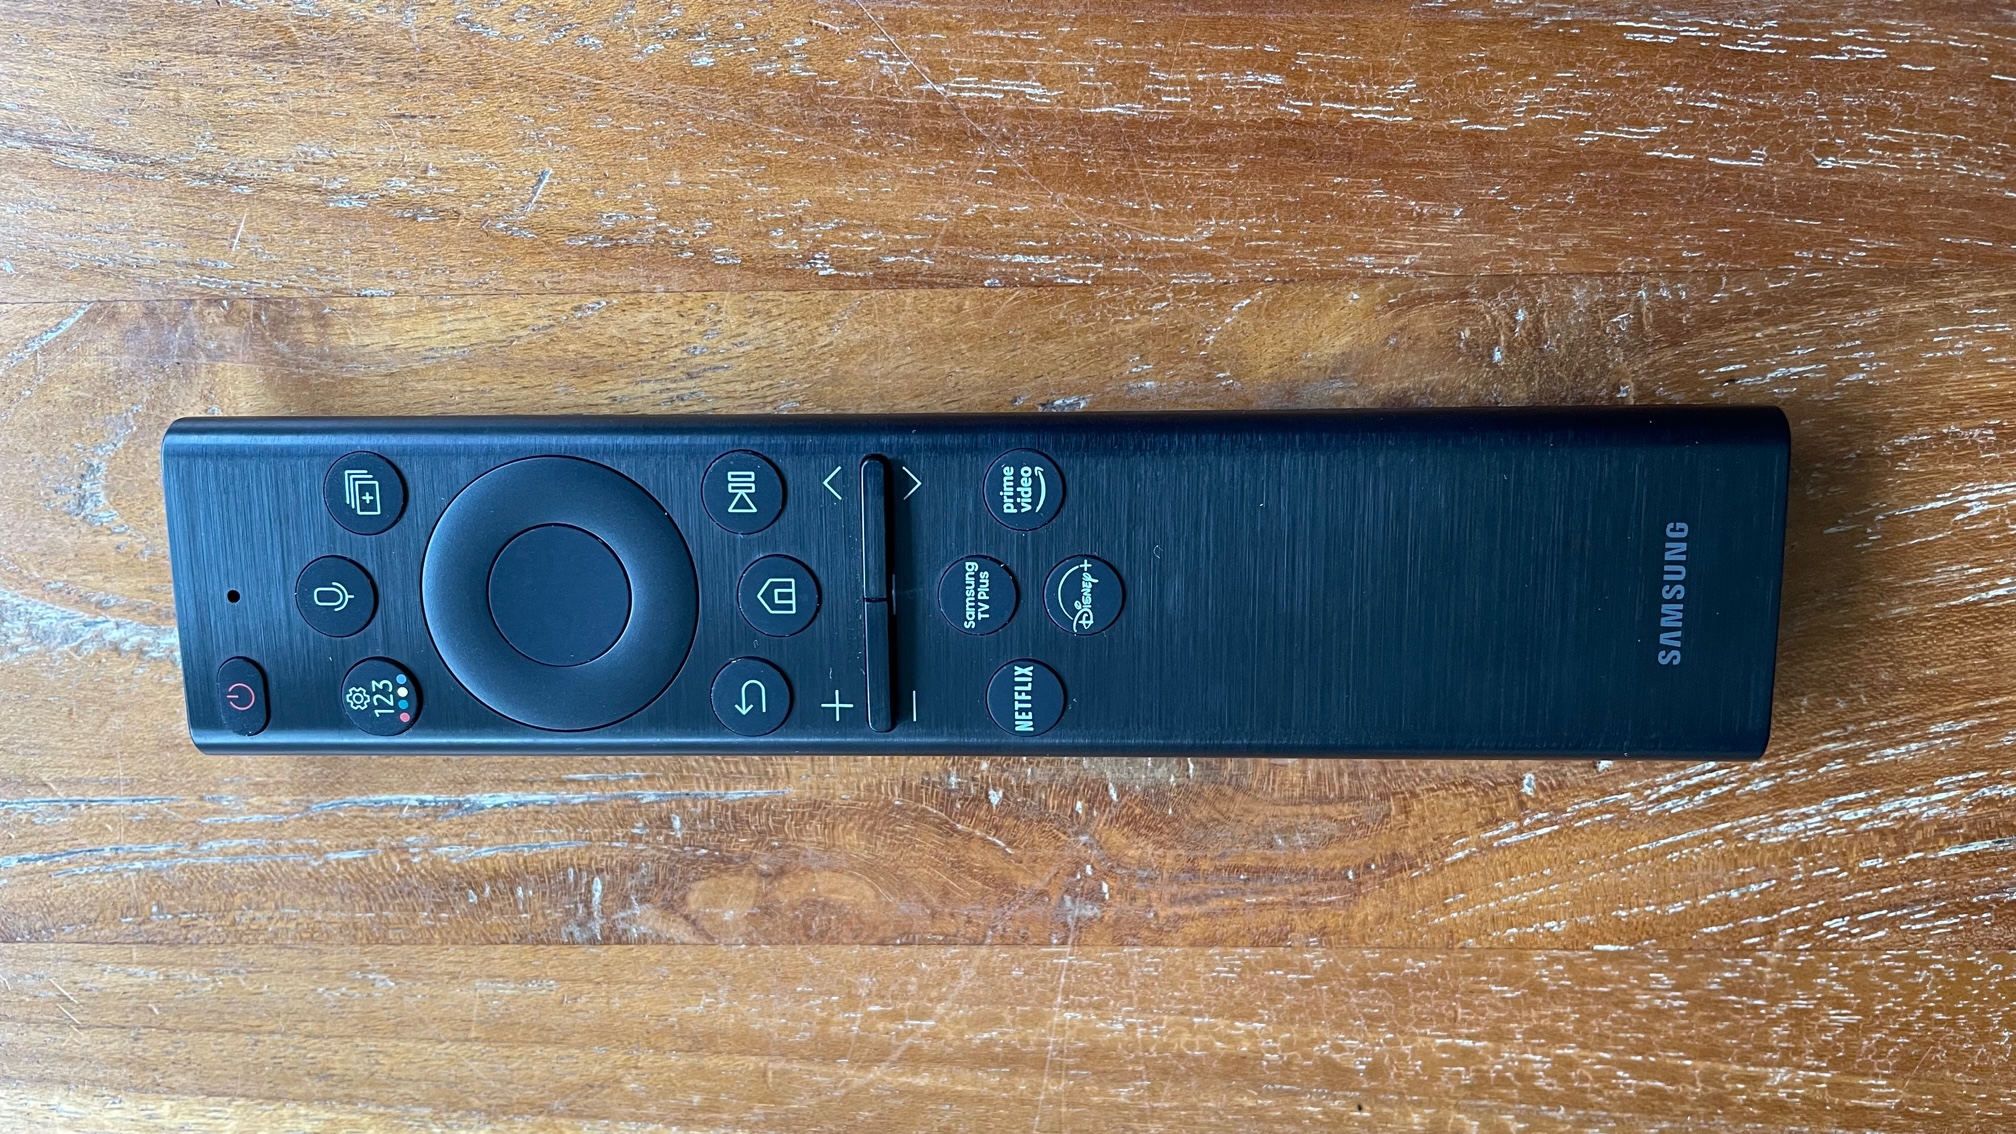 The remote control for the Samsung QE55Q60B TV pictured on a wooden surface.